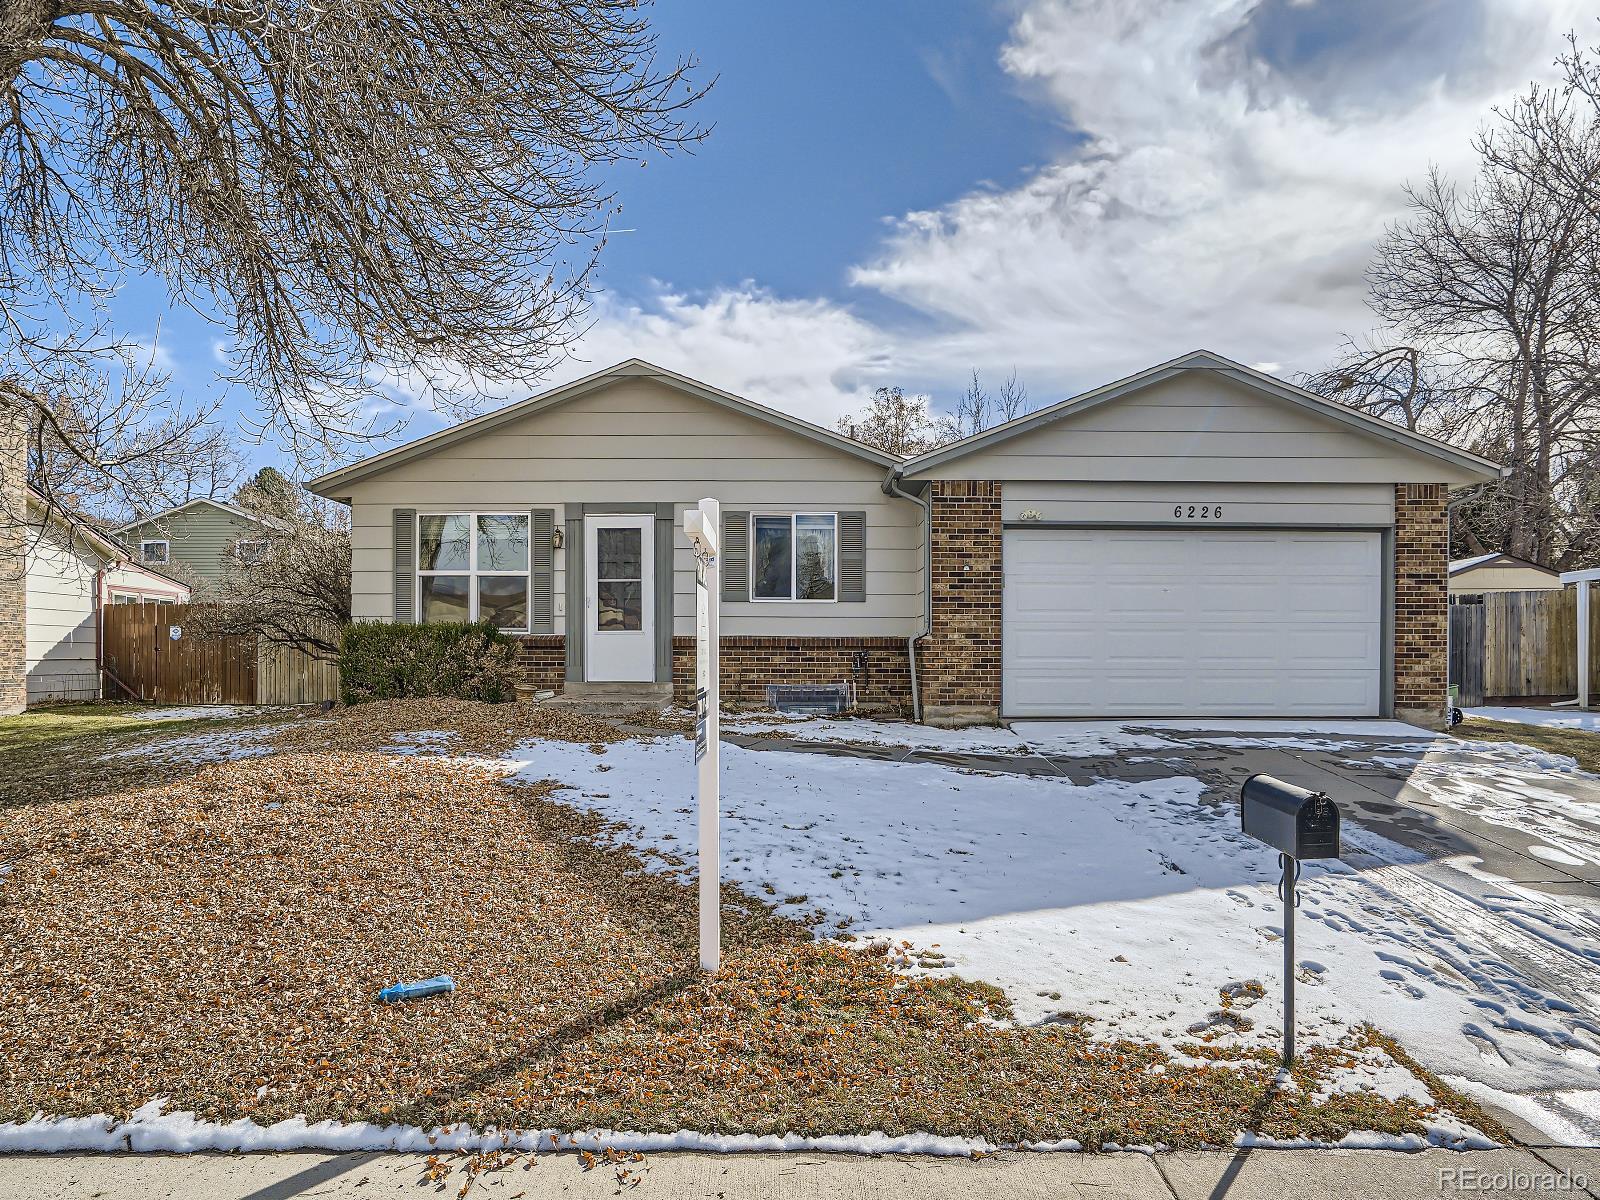 Report Image for 6226 W 75th Place,Arvada, Colorado